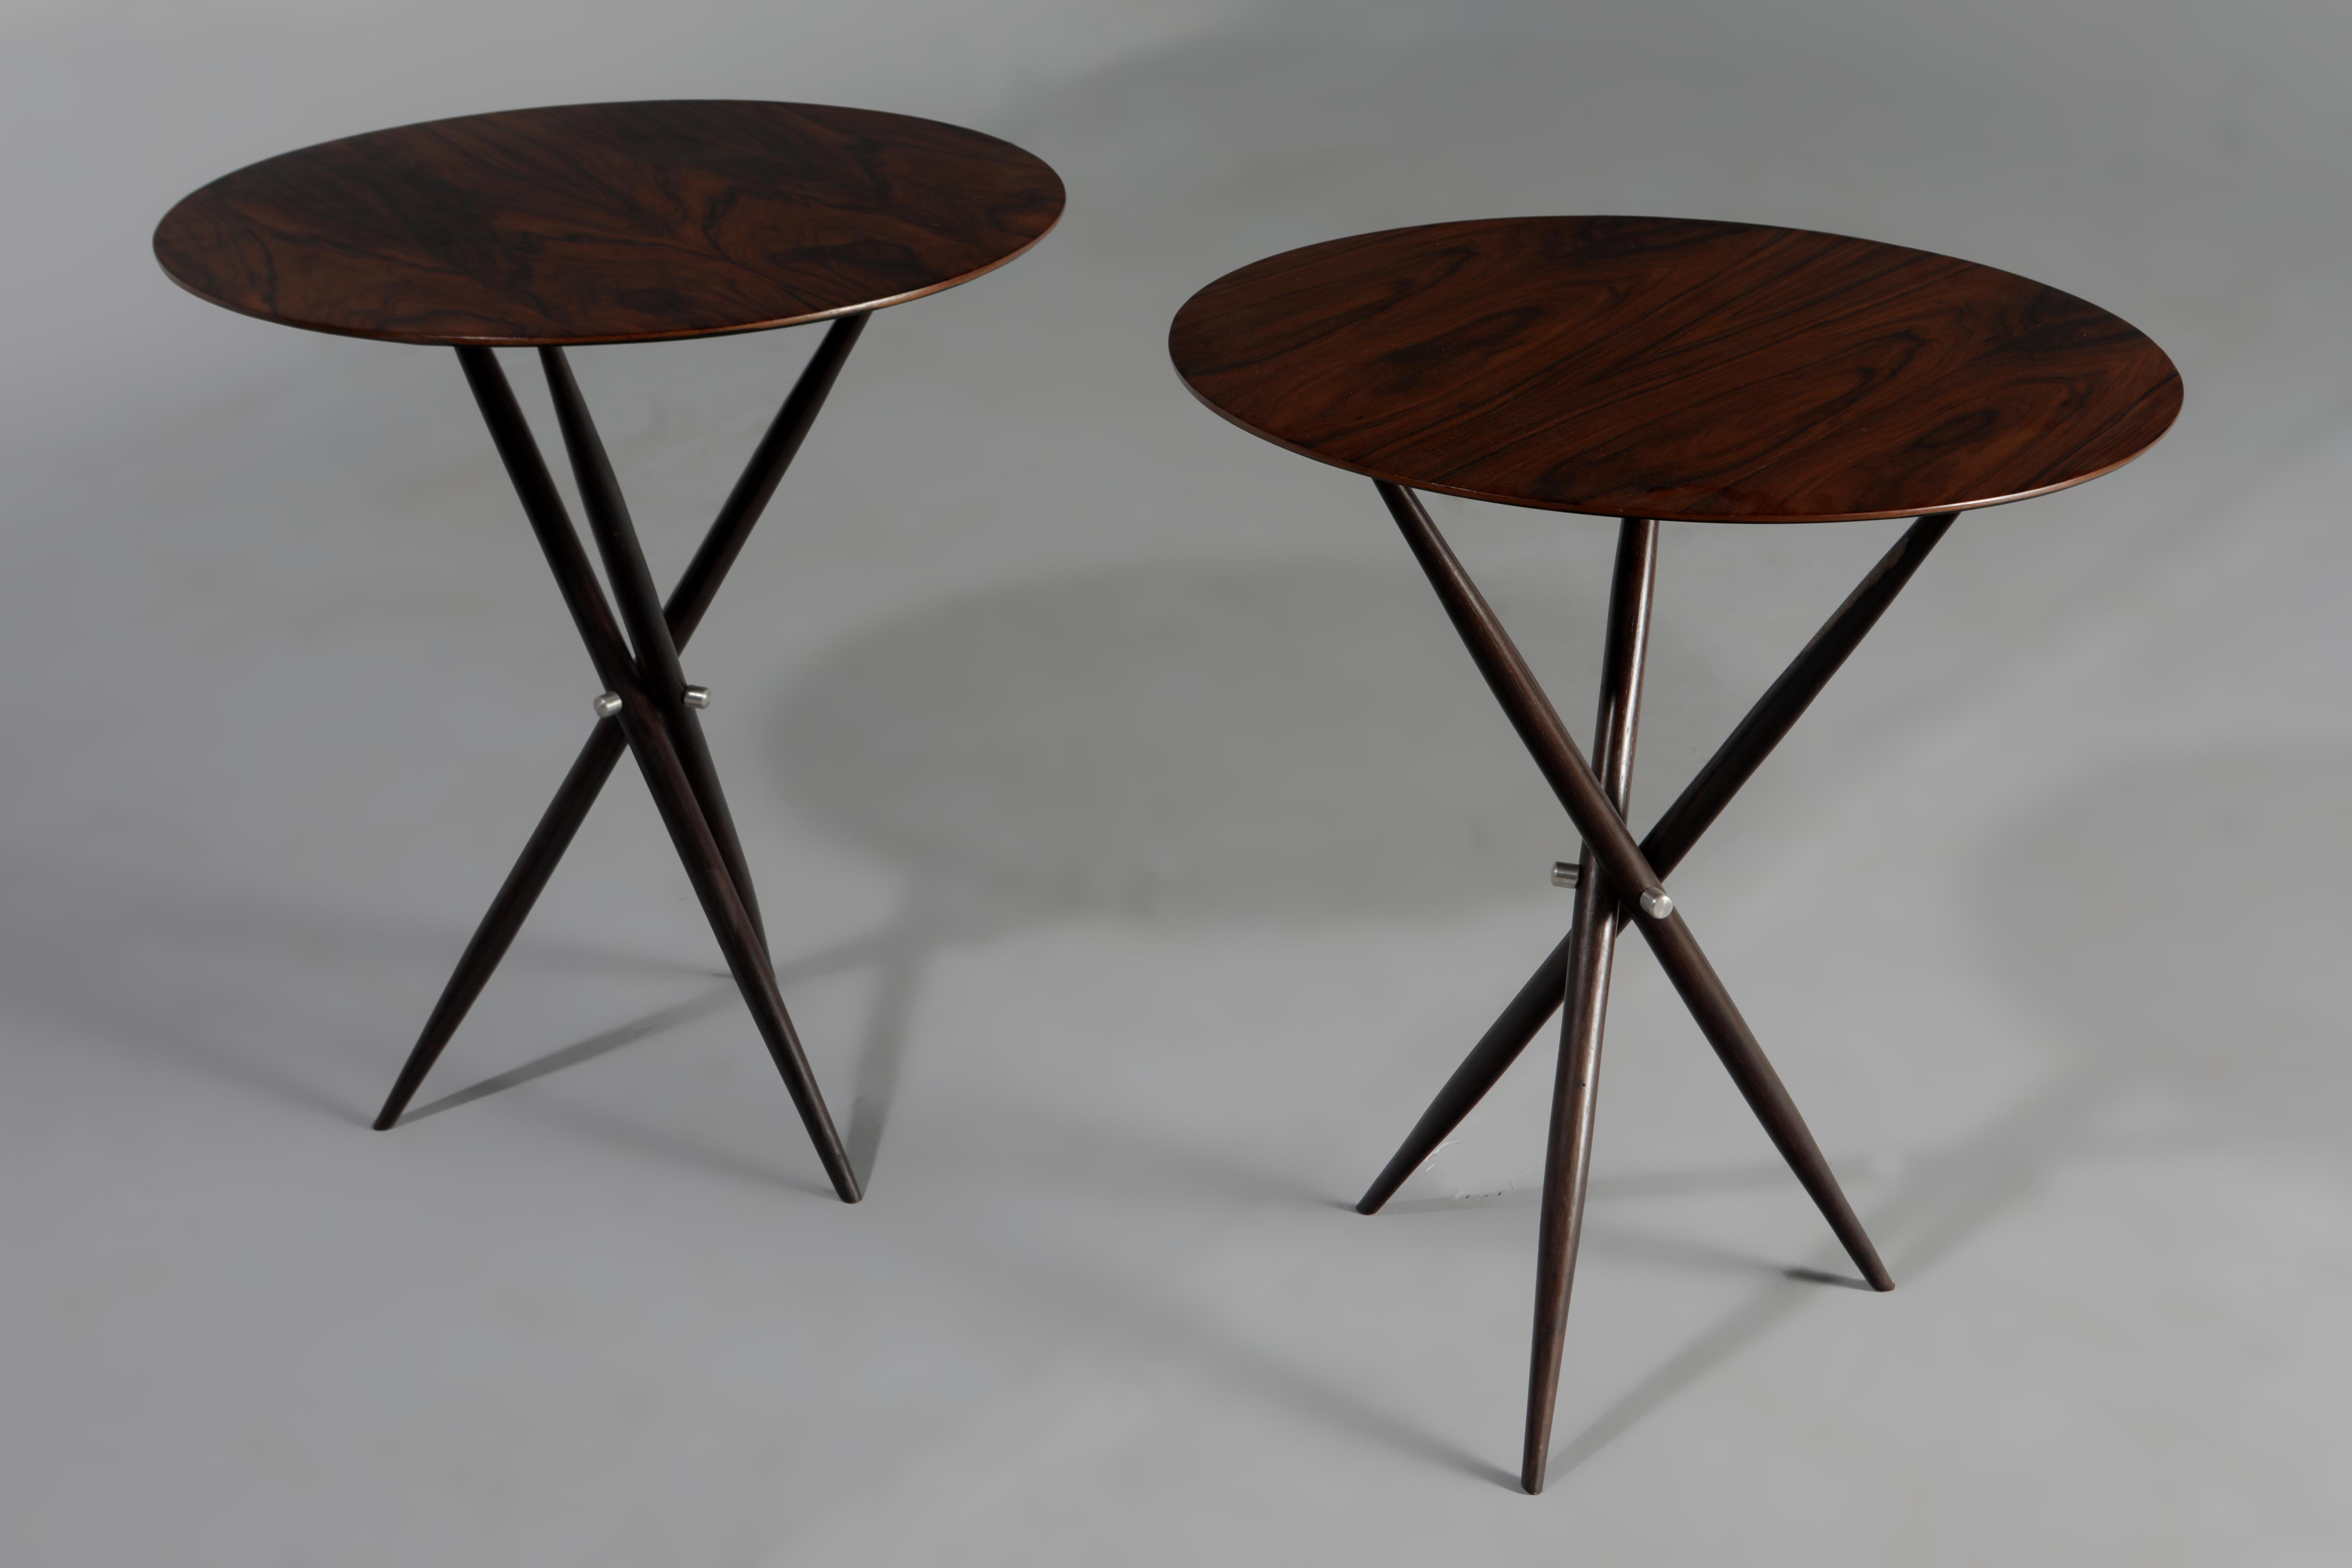 Mid-Century Modern Janete side table by Sergio Rodrigues, Brazil, 1950s.

The Janete side tables, designed by Sergio Rodrigues, have a simple yet elegant design and capture the essence of Brazilian modernist style. Made of solid wood, the tables